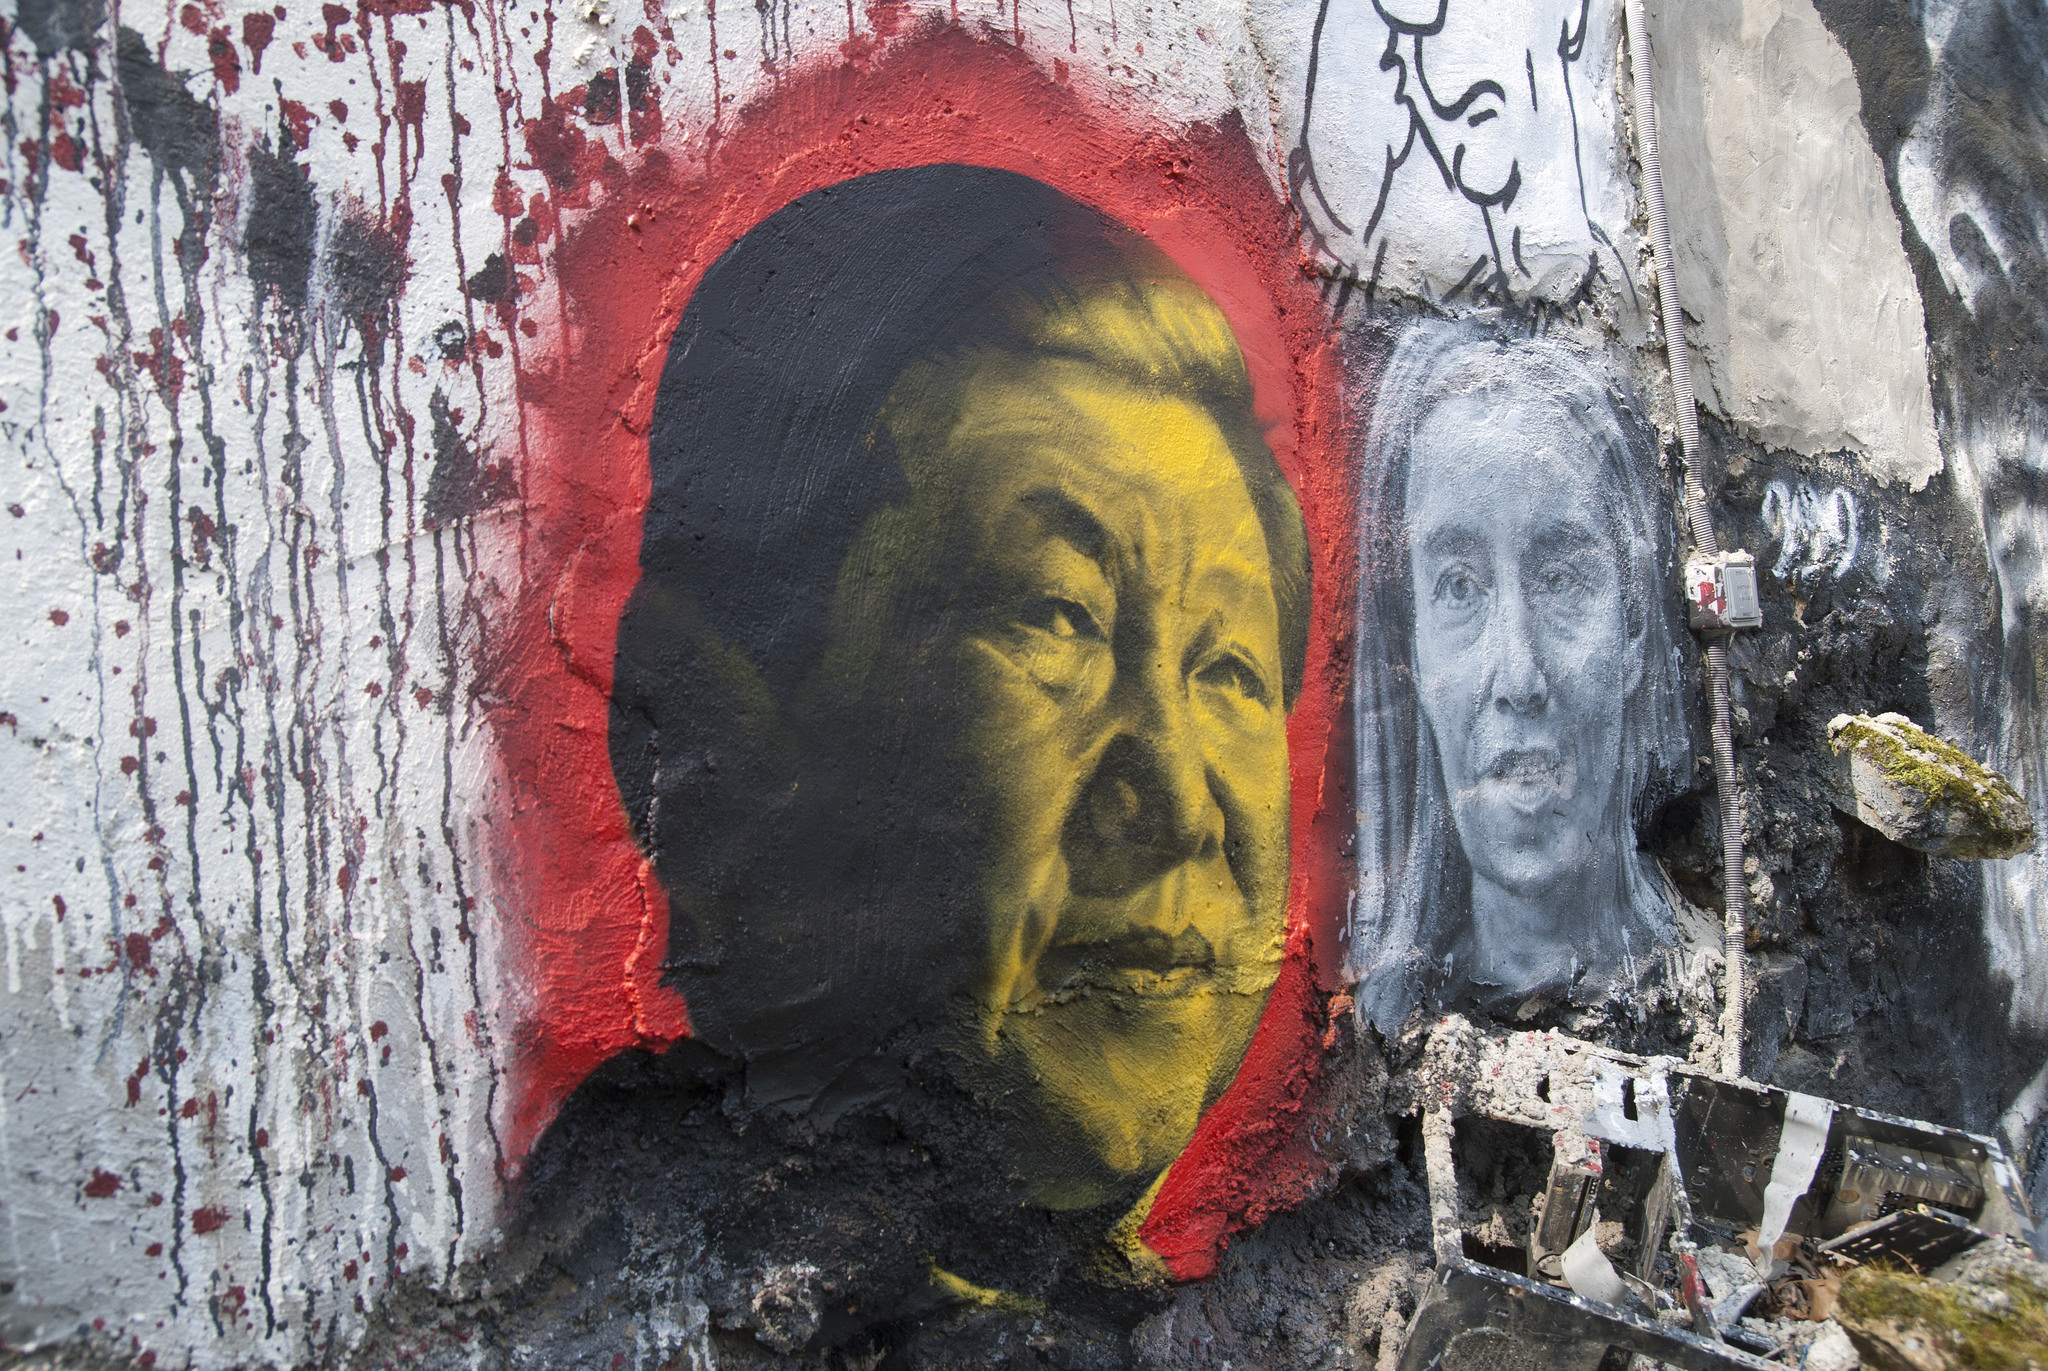 Graffiti war breaks out after Chinese Communist Party slogans